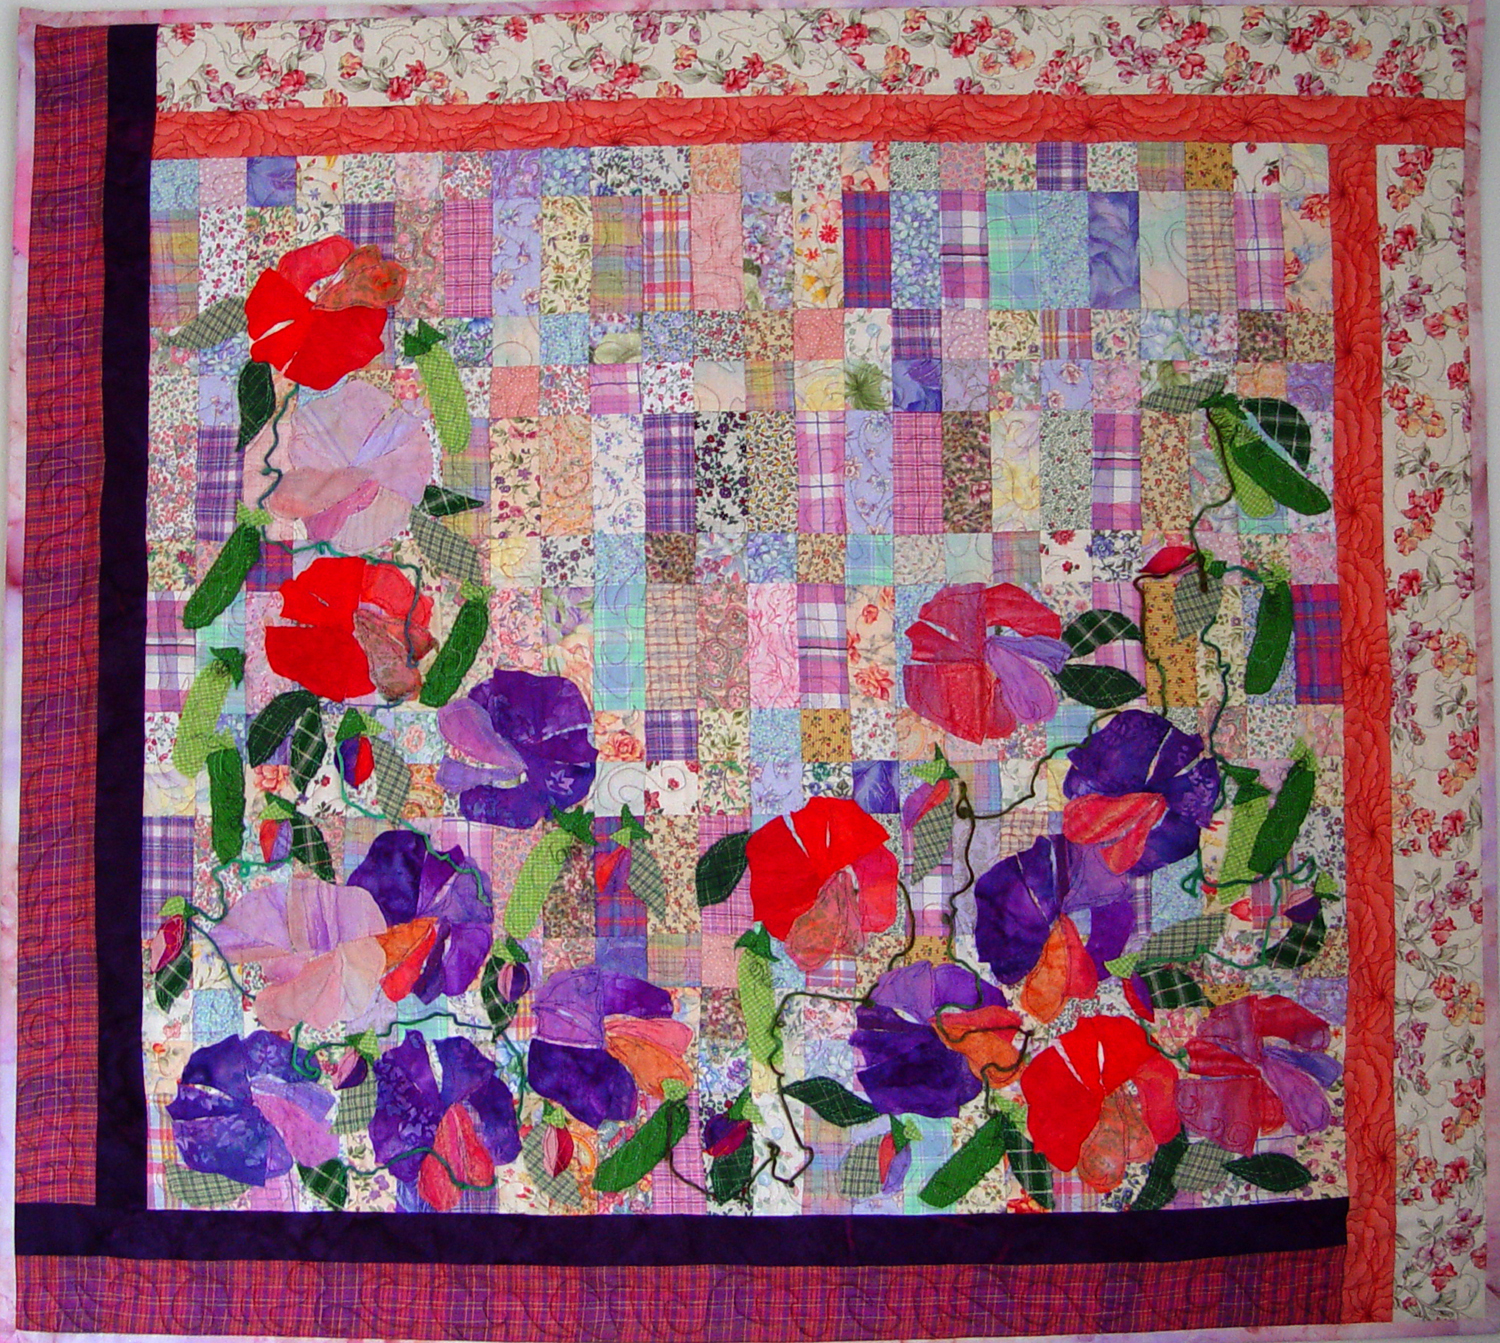 Basting a Quilt with a Tack Gun - New Quilters